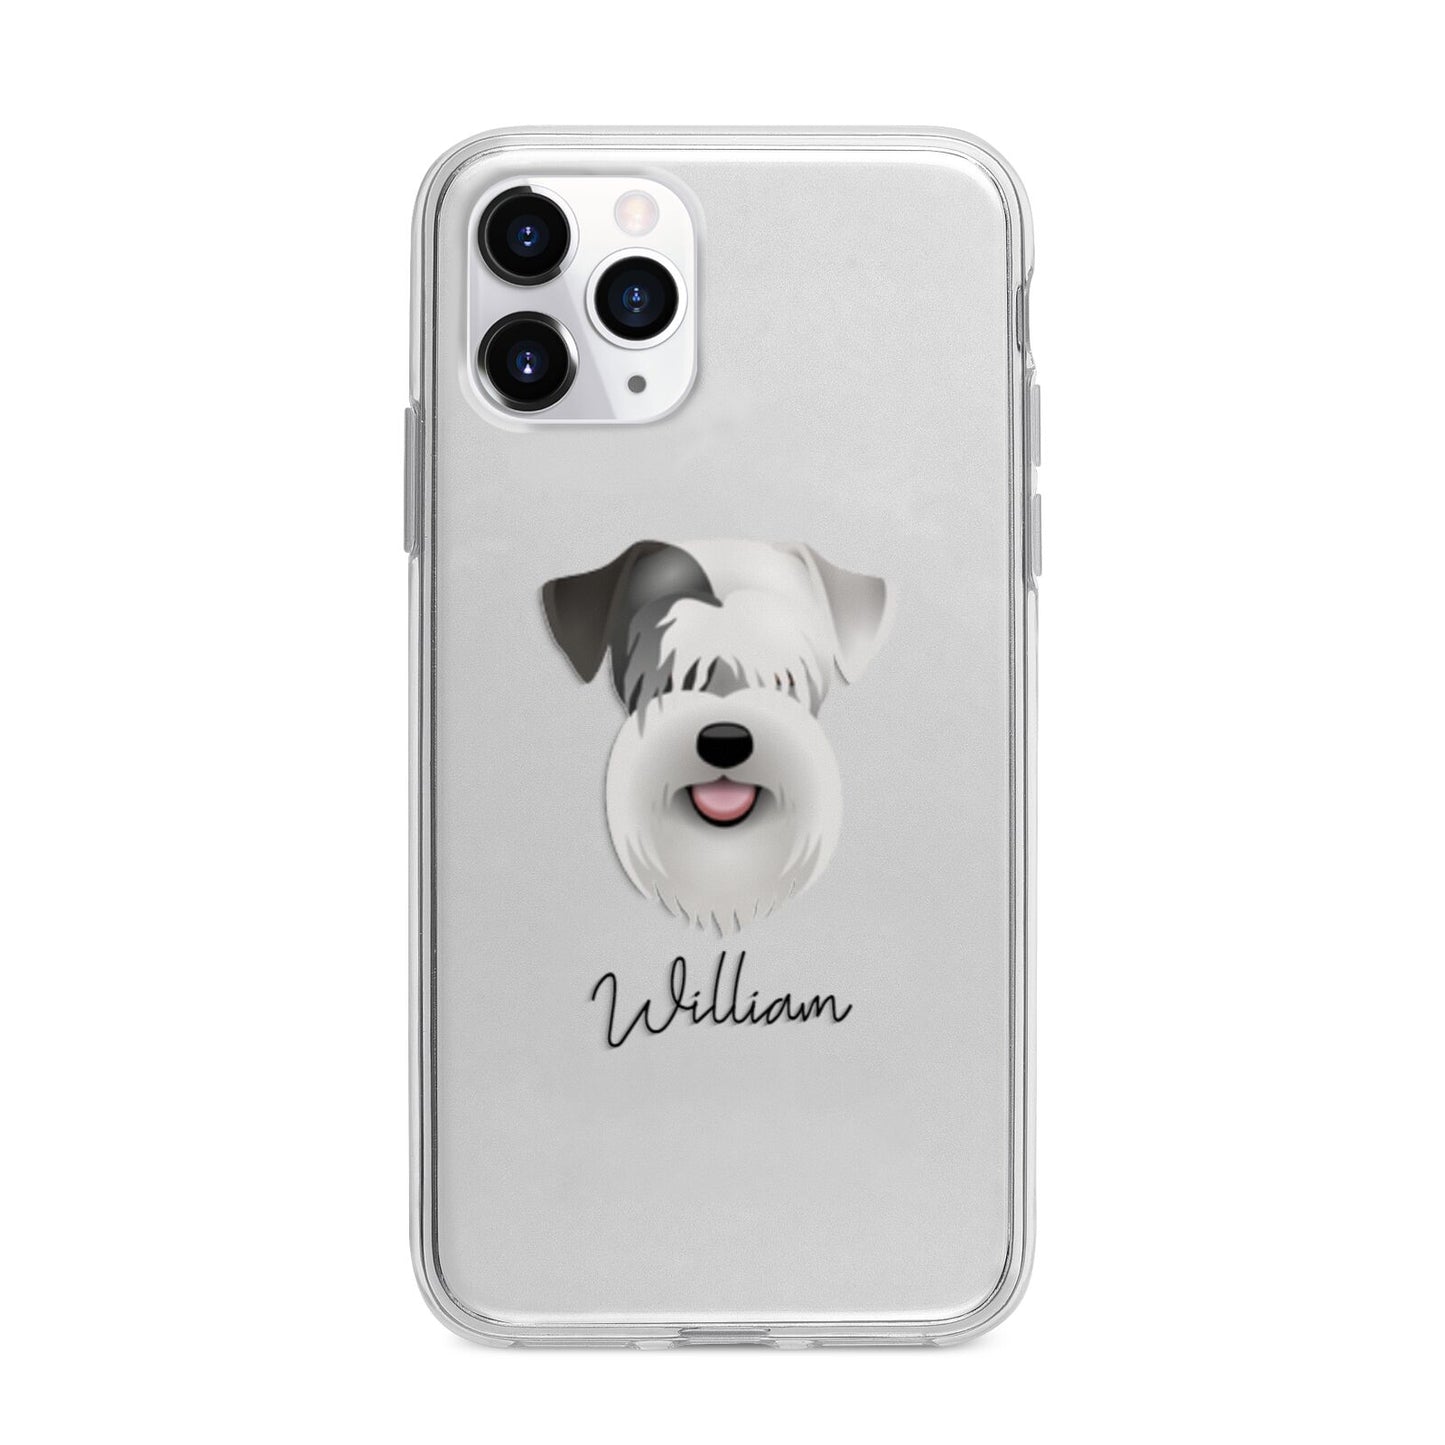 Sealyham Terrier Personalised Apple iPhone 11 Pro in Silver with Bumper Case